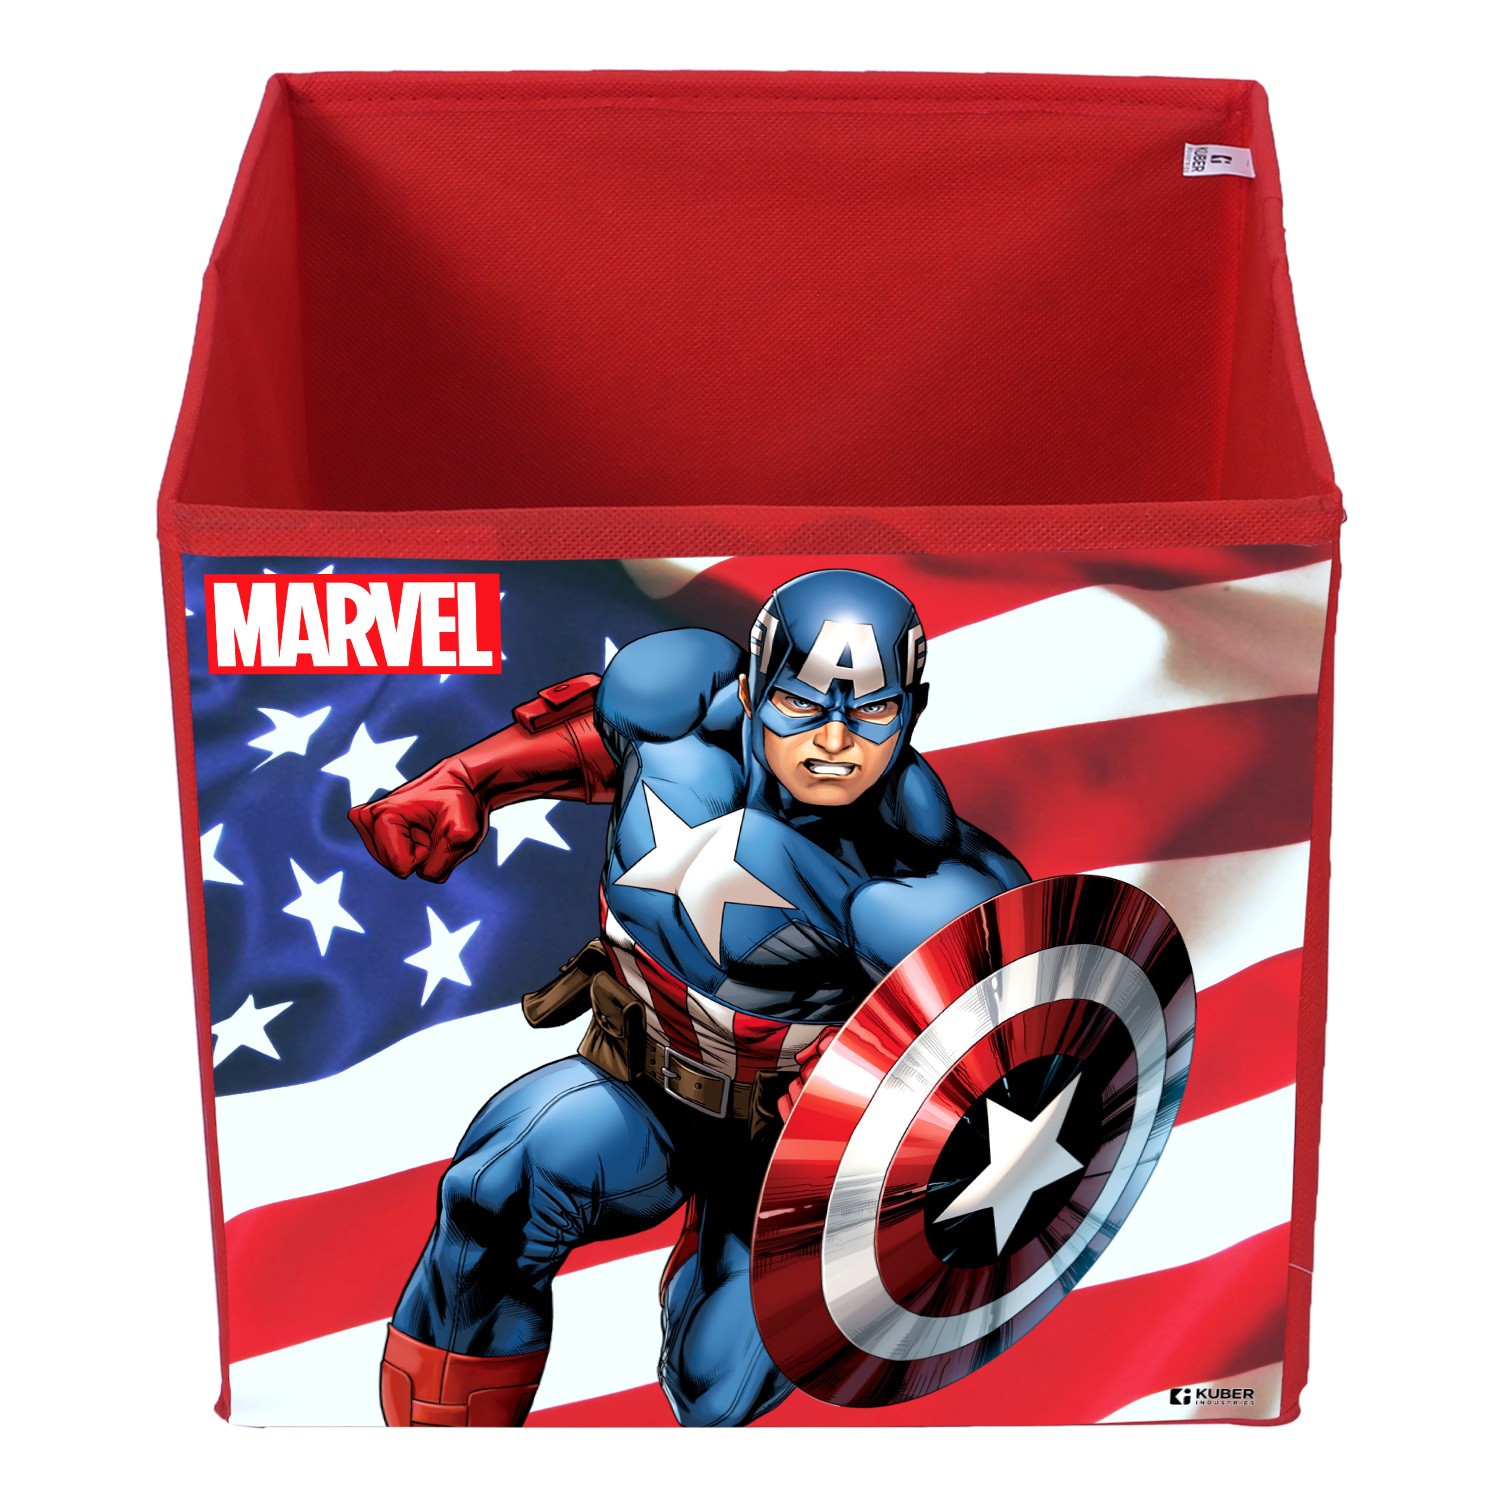 Kuber Industries Marvel Captain America Print Durable & Collapsible Square Storage Box|Clothes Organizer With Handle,.(Red)